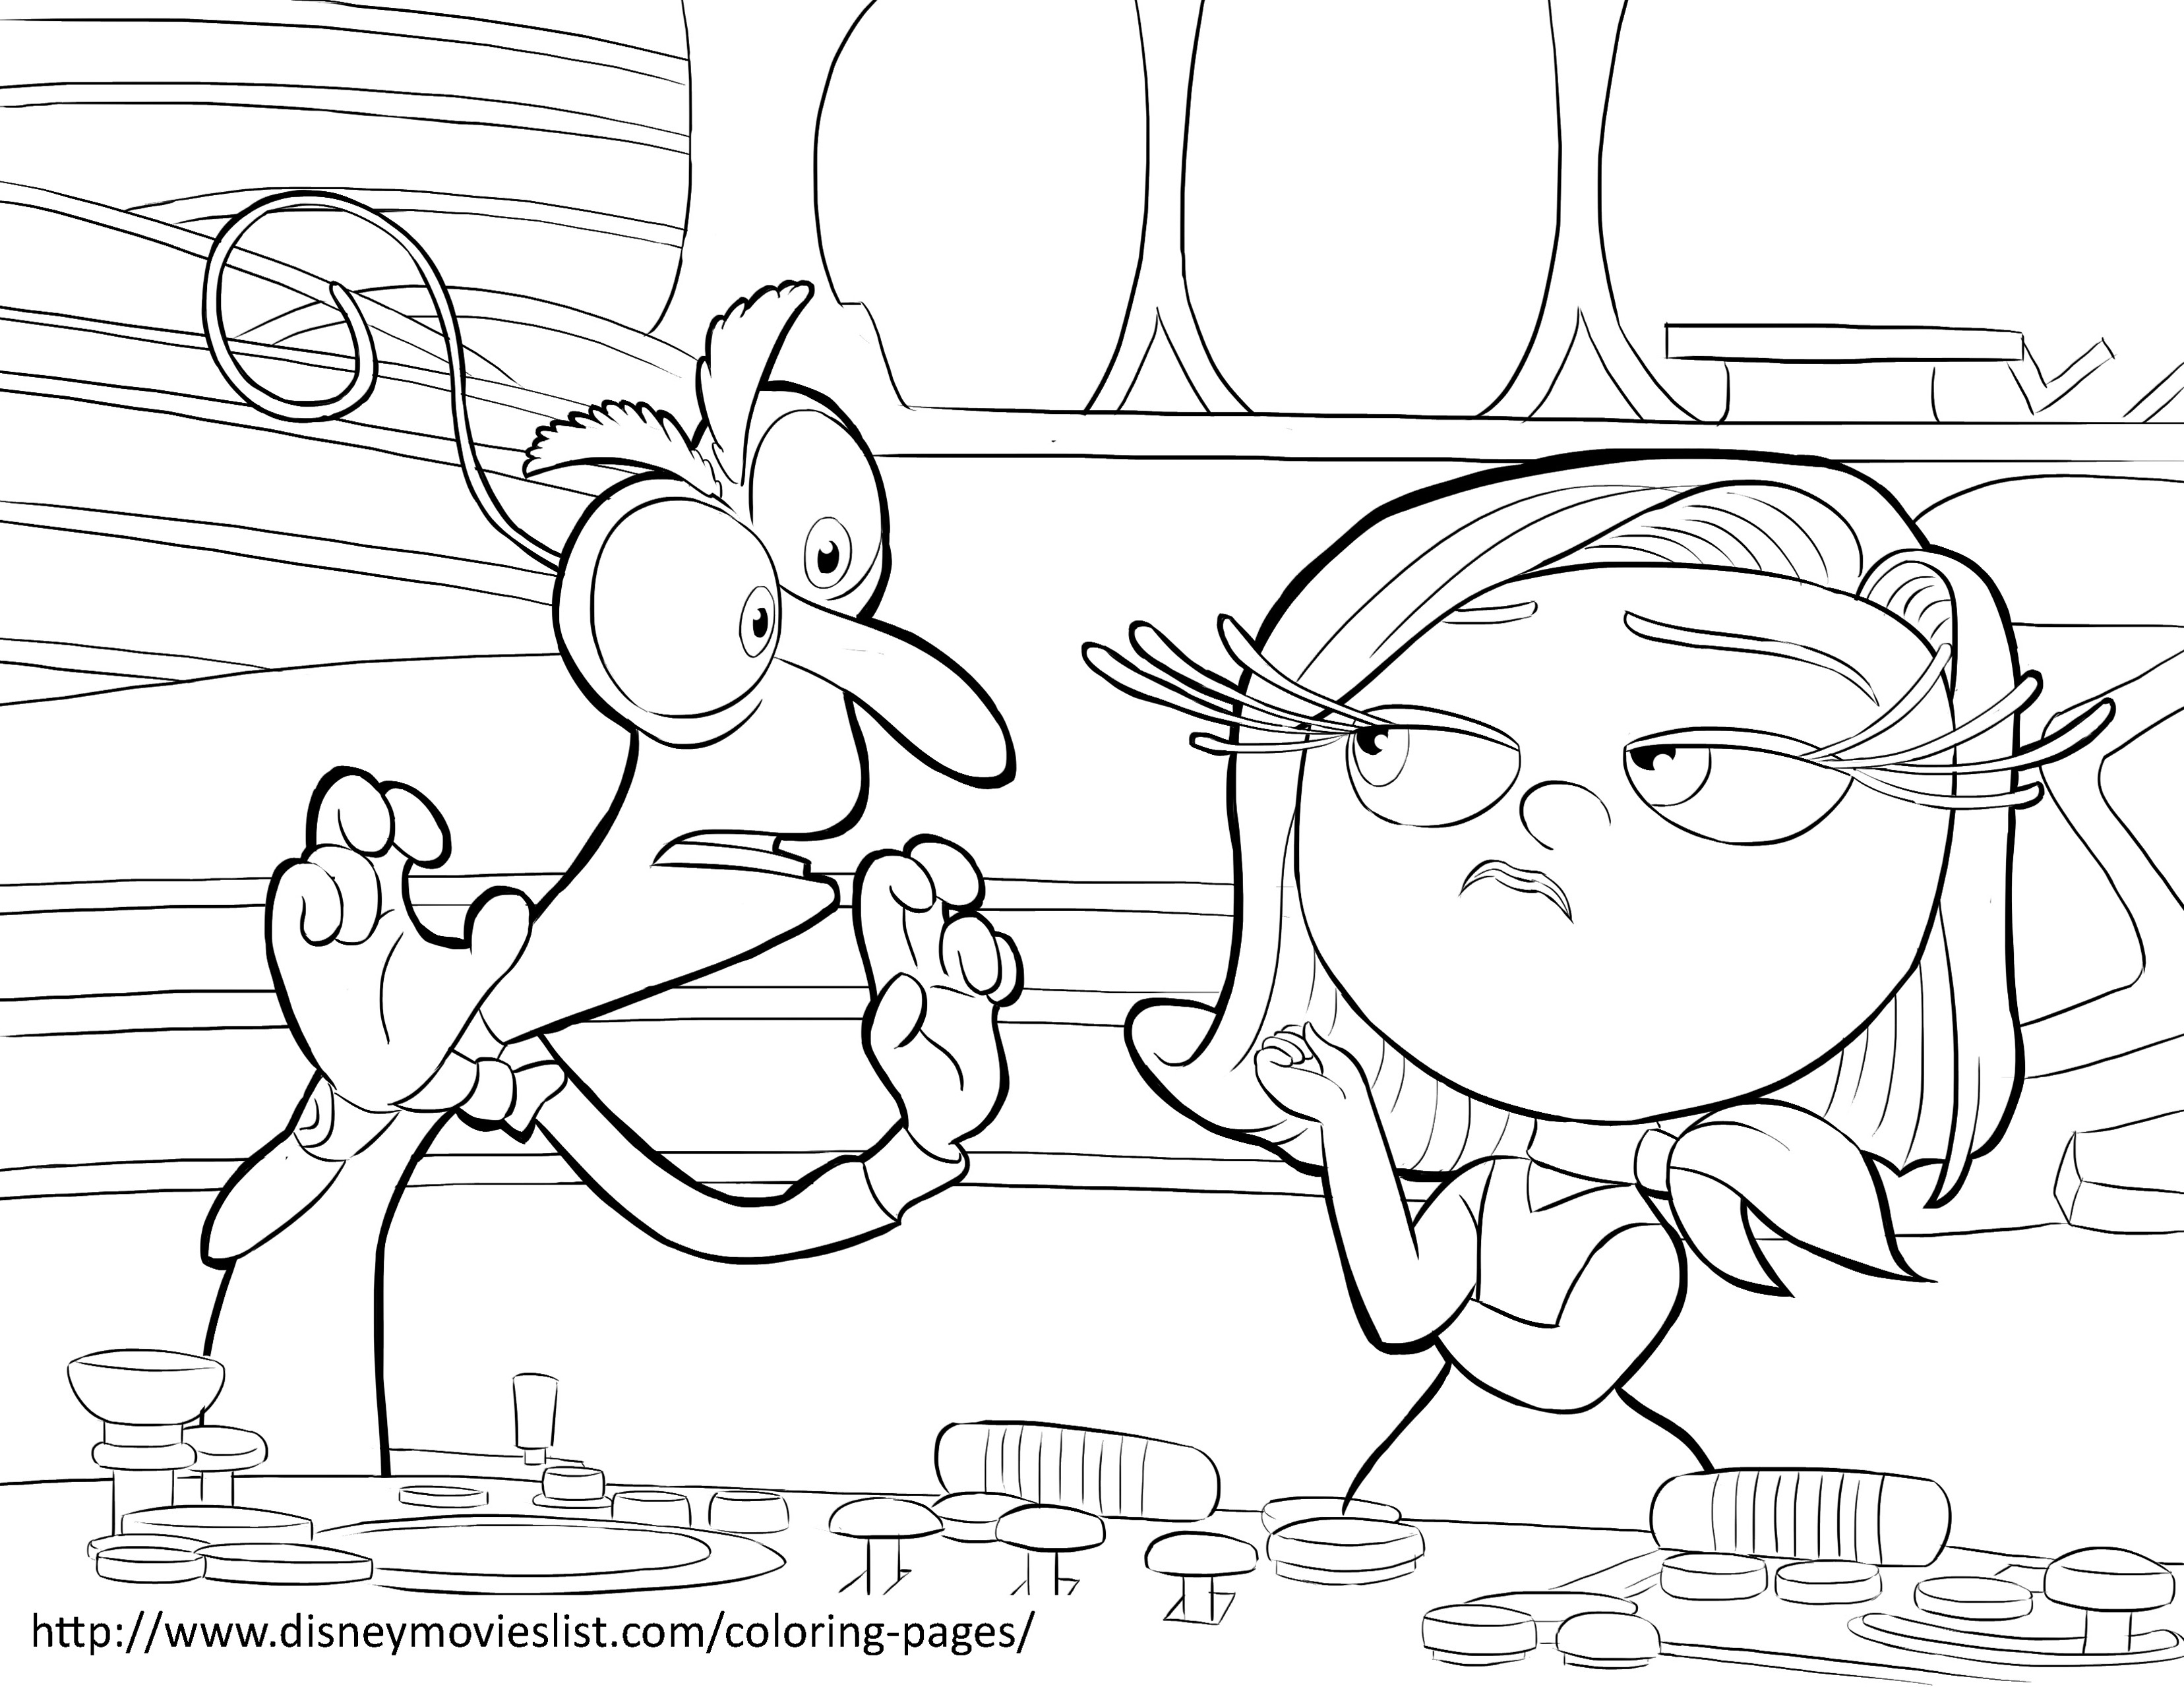 Disney-Pixar's Inside Out coloring page to print and color : Fear and Disgust